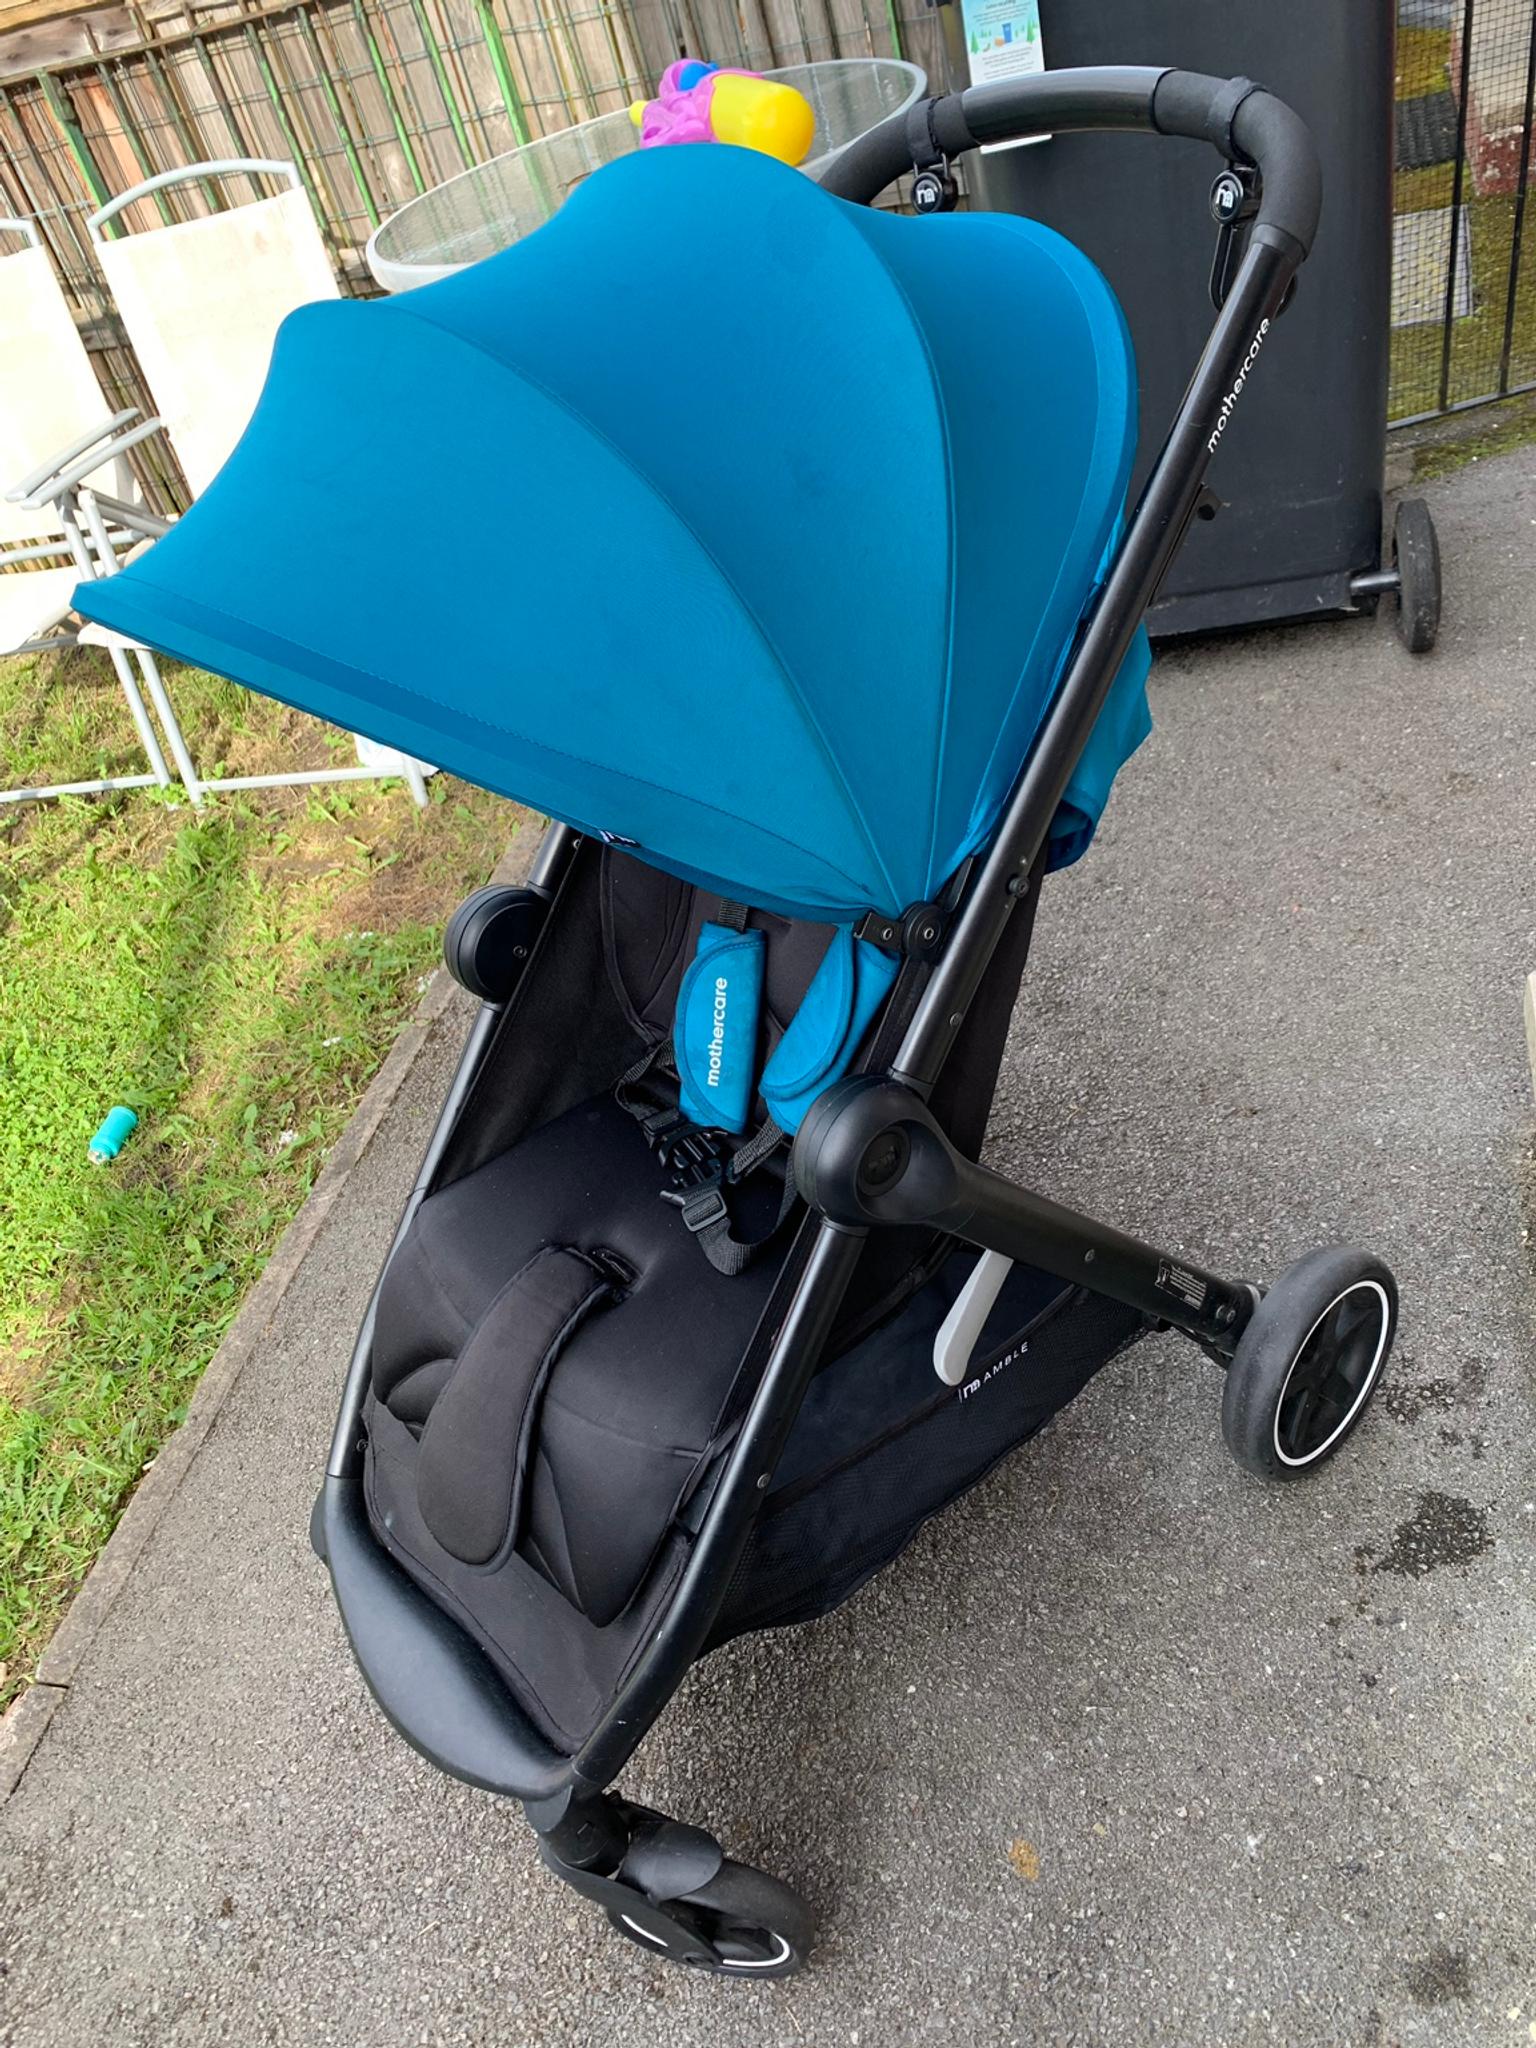 mothercare lightweight buggy